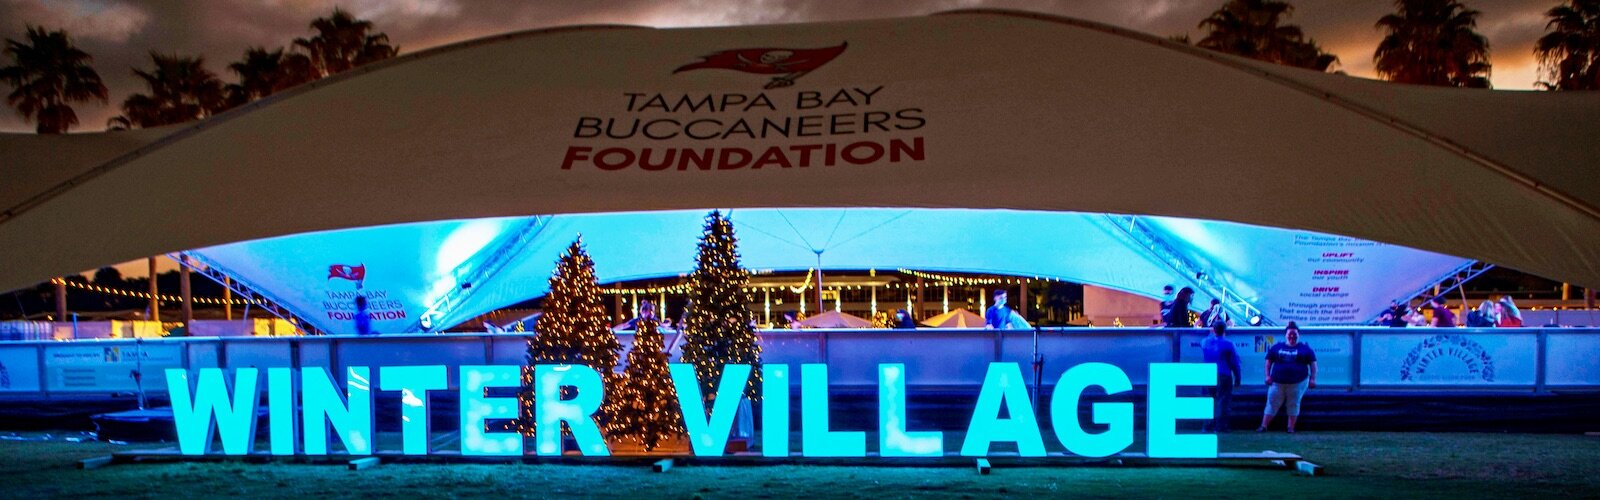 The Tampa Downtown Partnership's annual Winter Village, featuring an ice skating rink and a nightly light show set to holiday music at Curtis Hixon Waterfront Park, runs through Jan. 3, 2021.